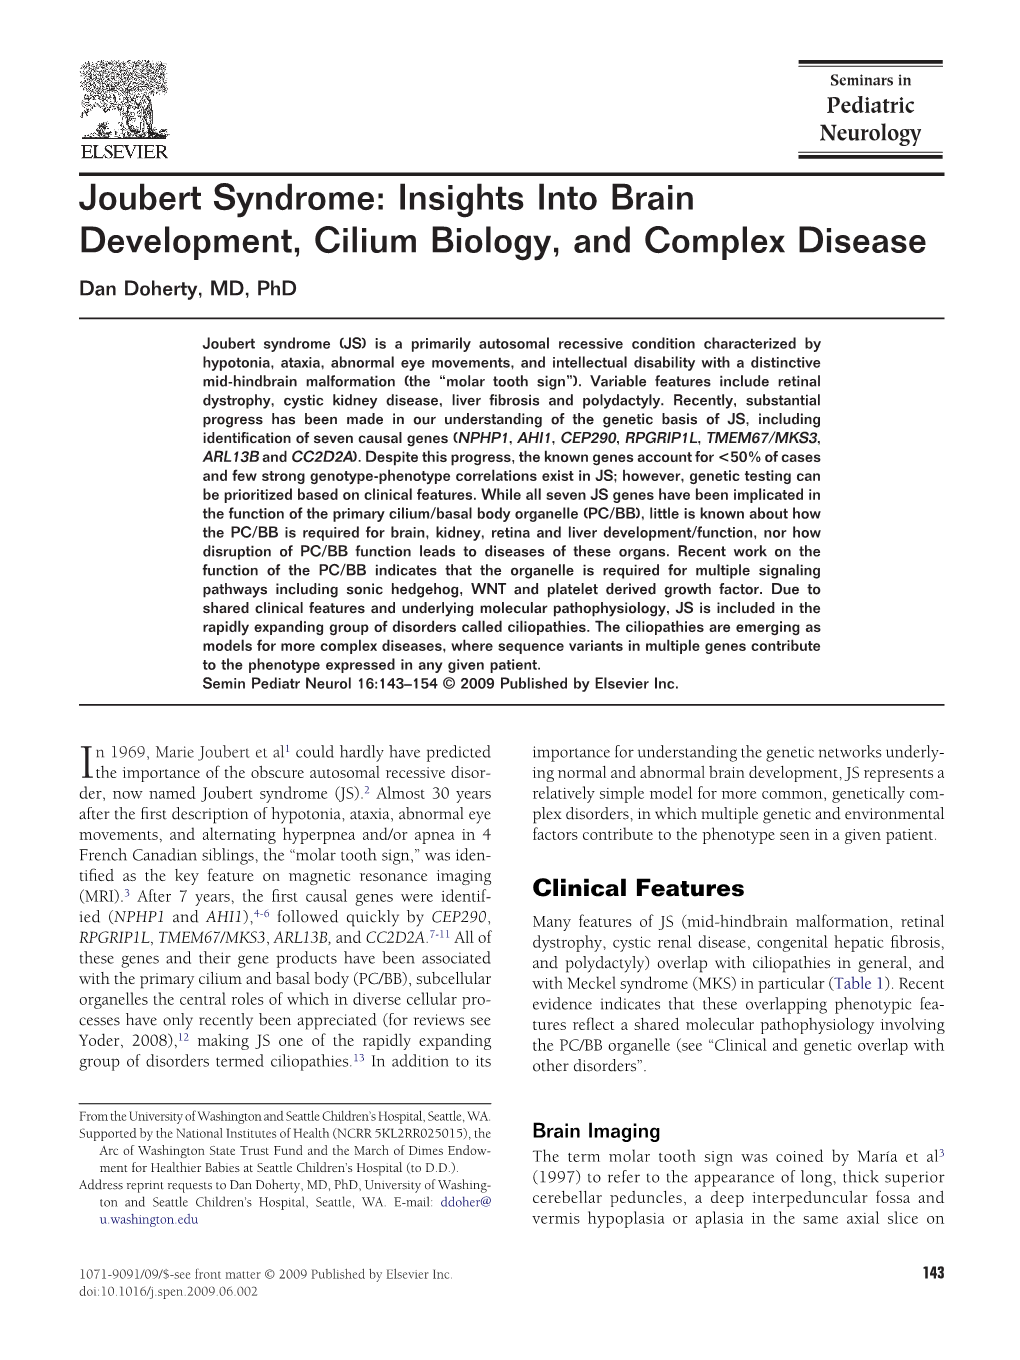 Joubert Syndrome: Insights Into Brain Development, Cilium Biology, and Complex Disease Dan Doherty, MD, Phd